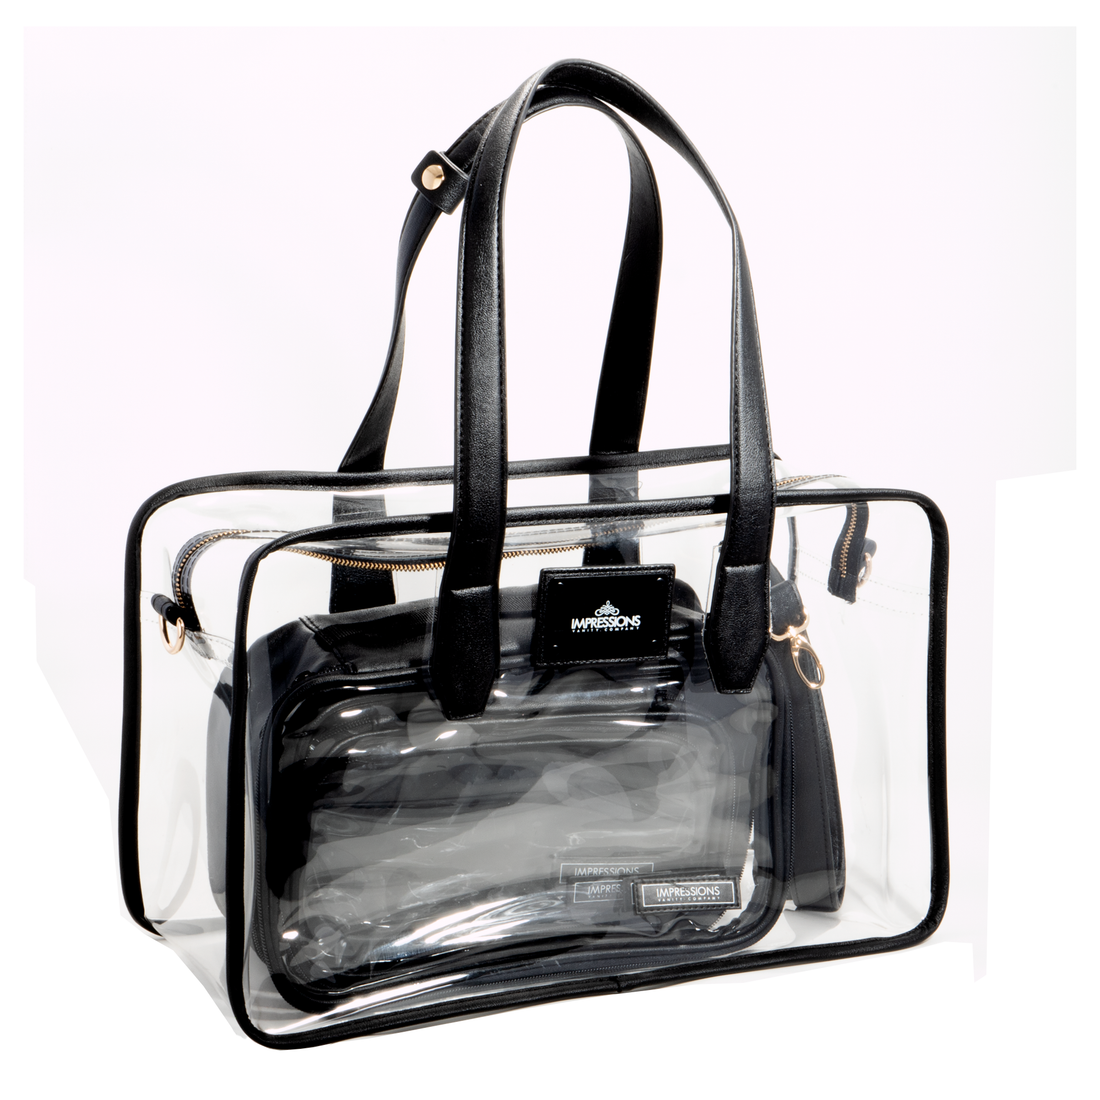 White Prints Clear Purse Cute Transparent Tote Bag with Inner Pouch